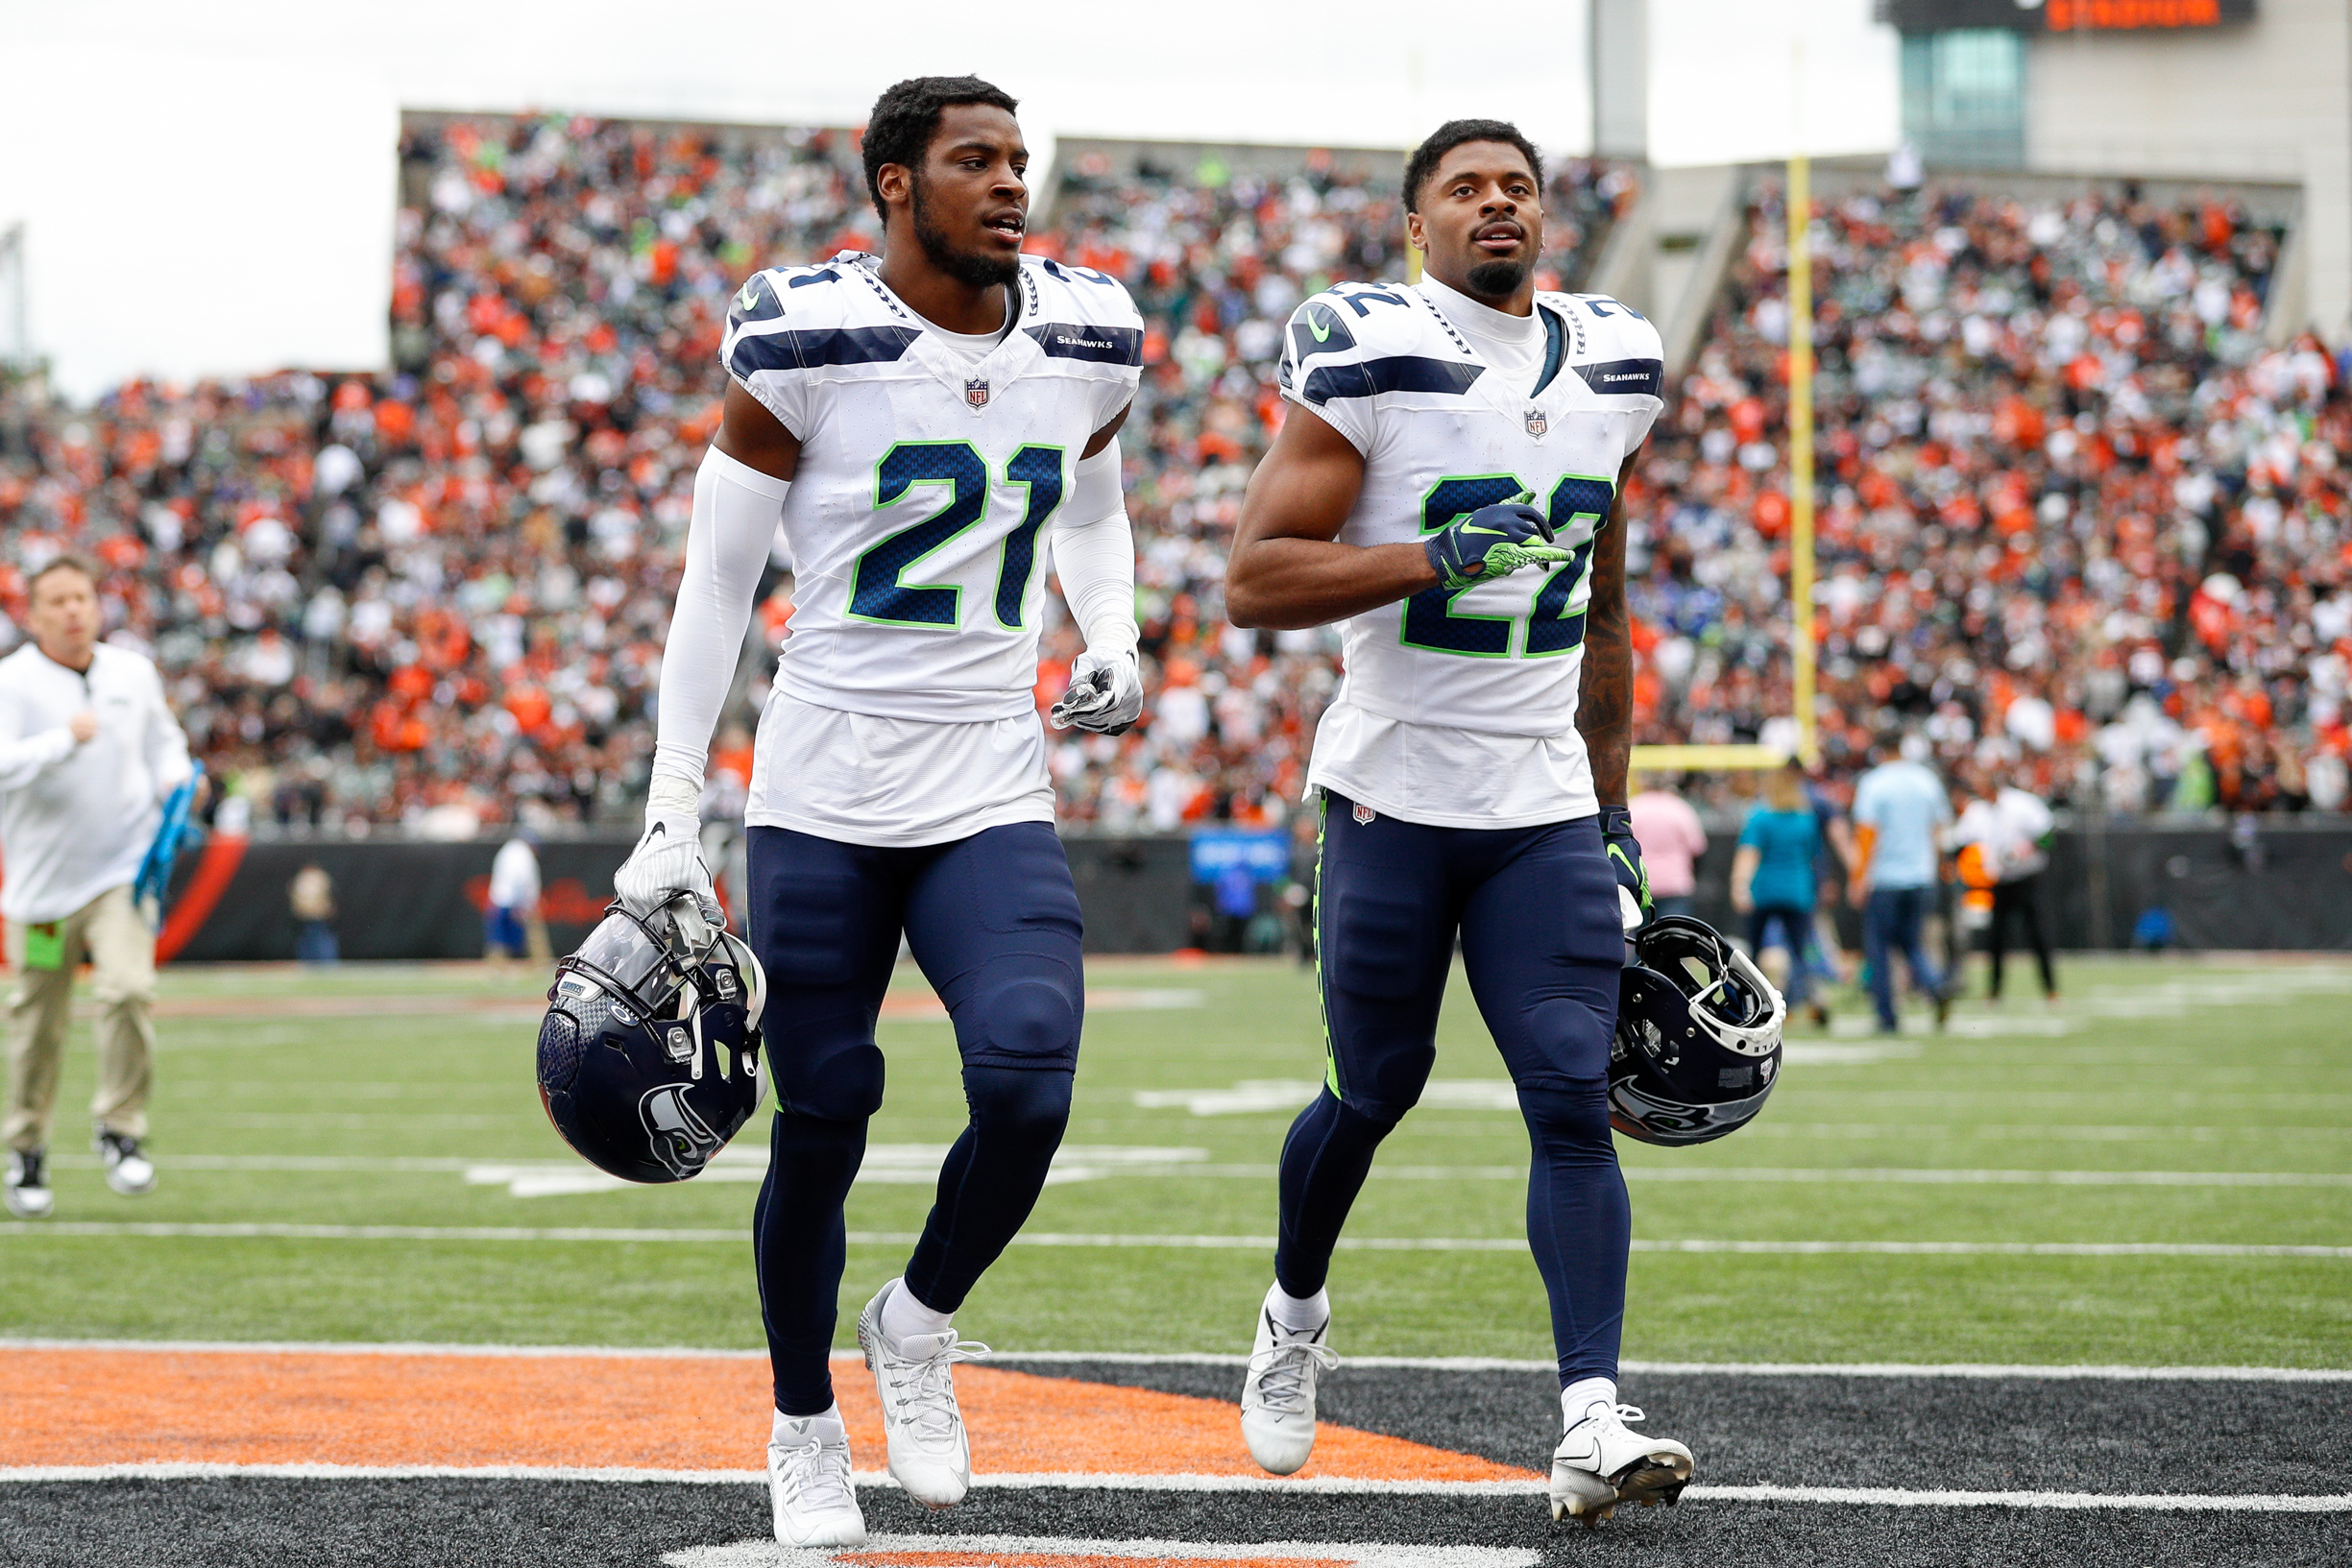 NFL: OCT 15 Seahawks at Bengals